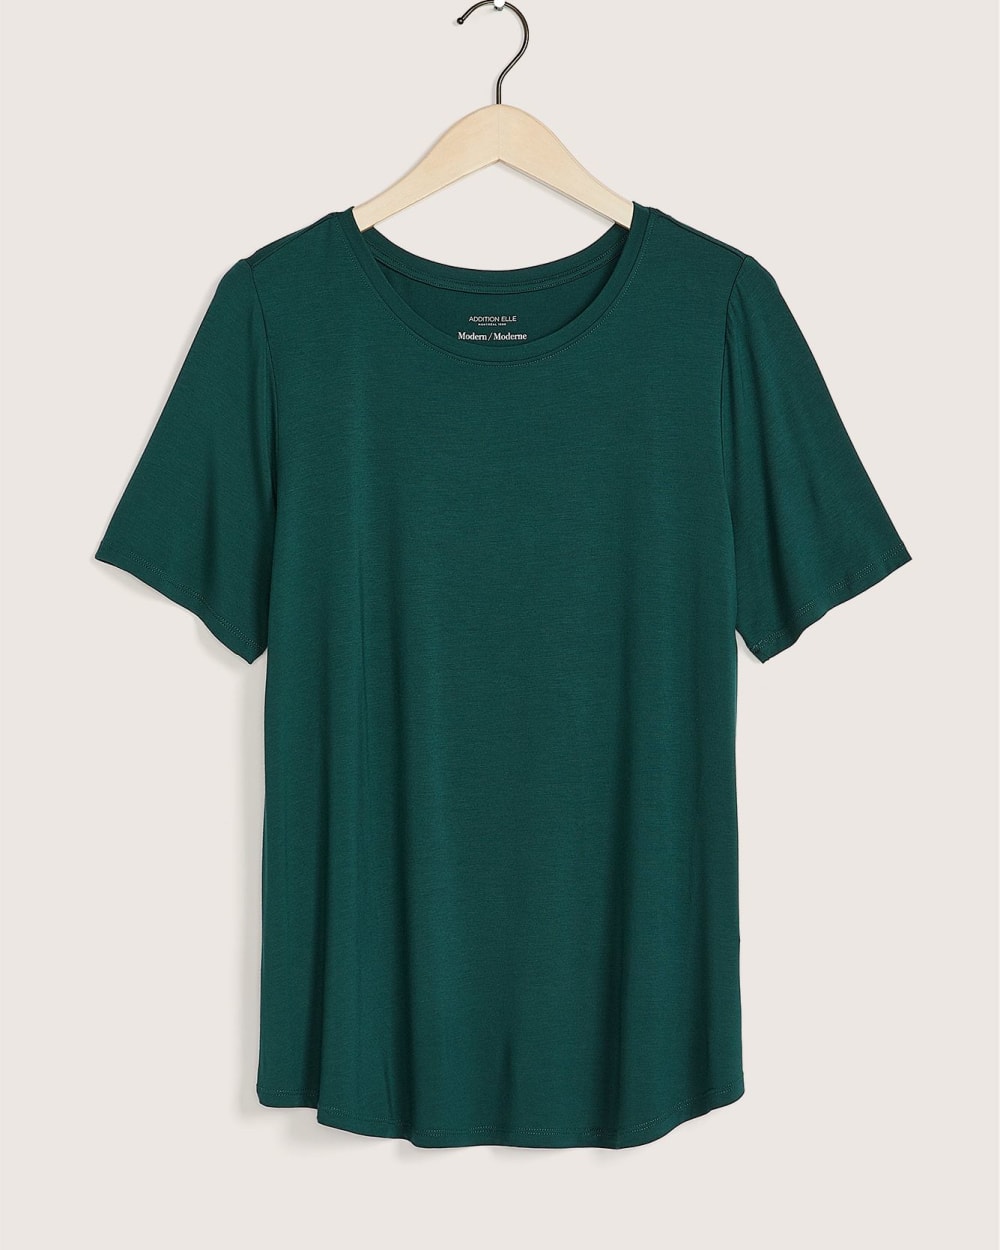 Responsible, Solid Modern-Fit Crew Neck Tee - Addition Elle | Penningtons